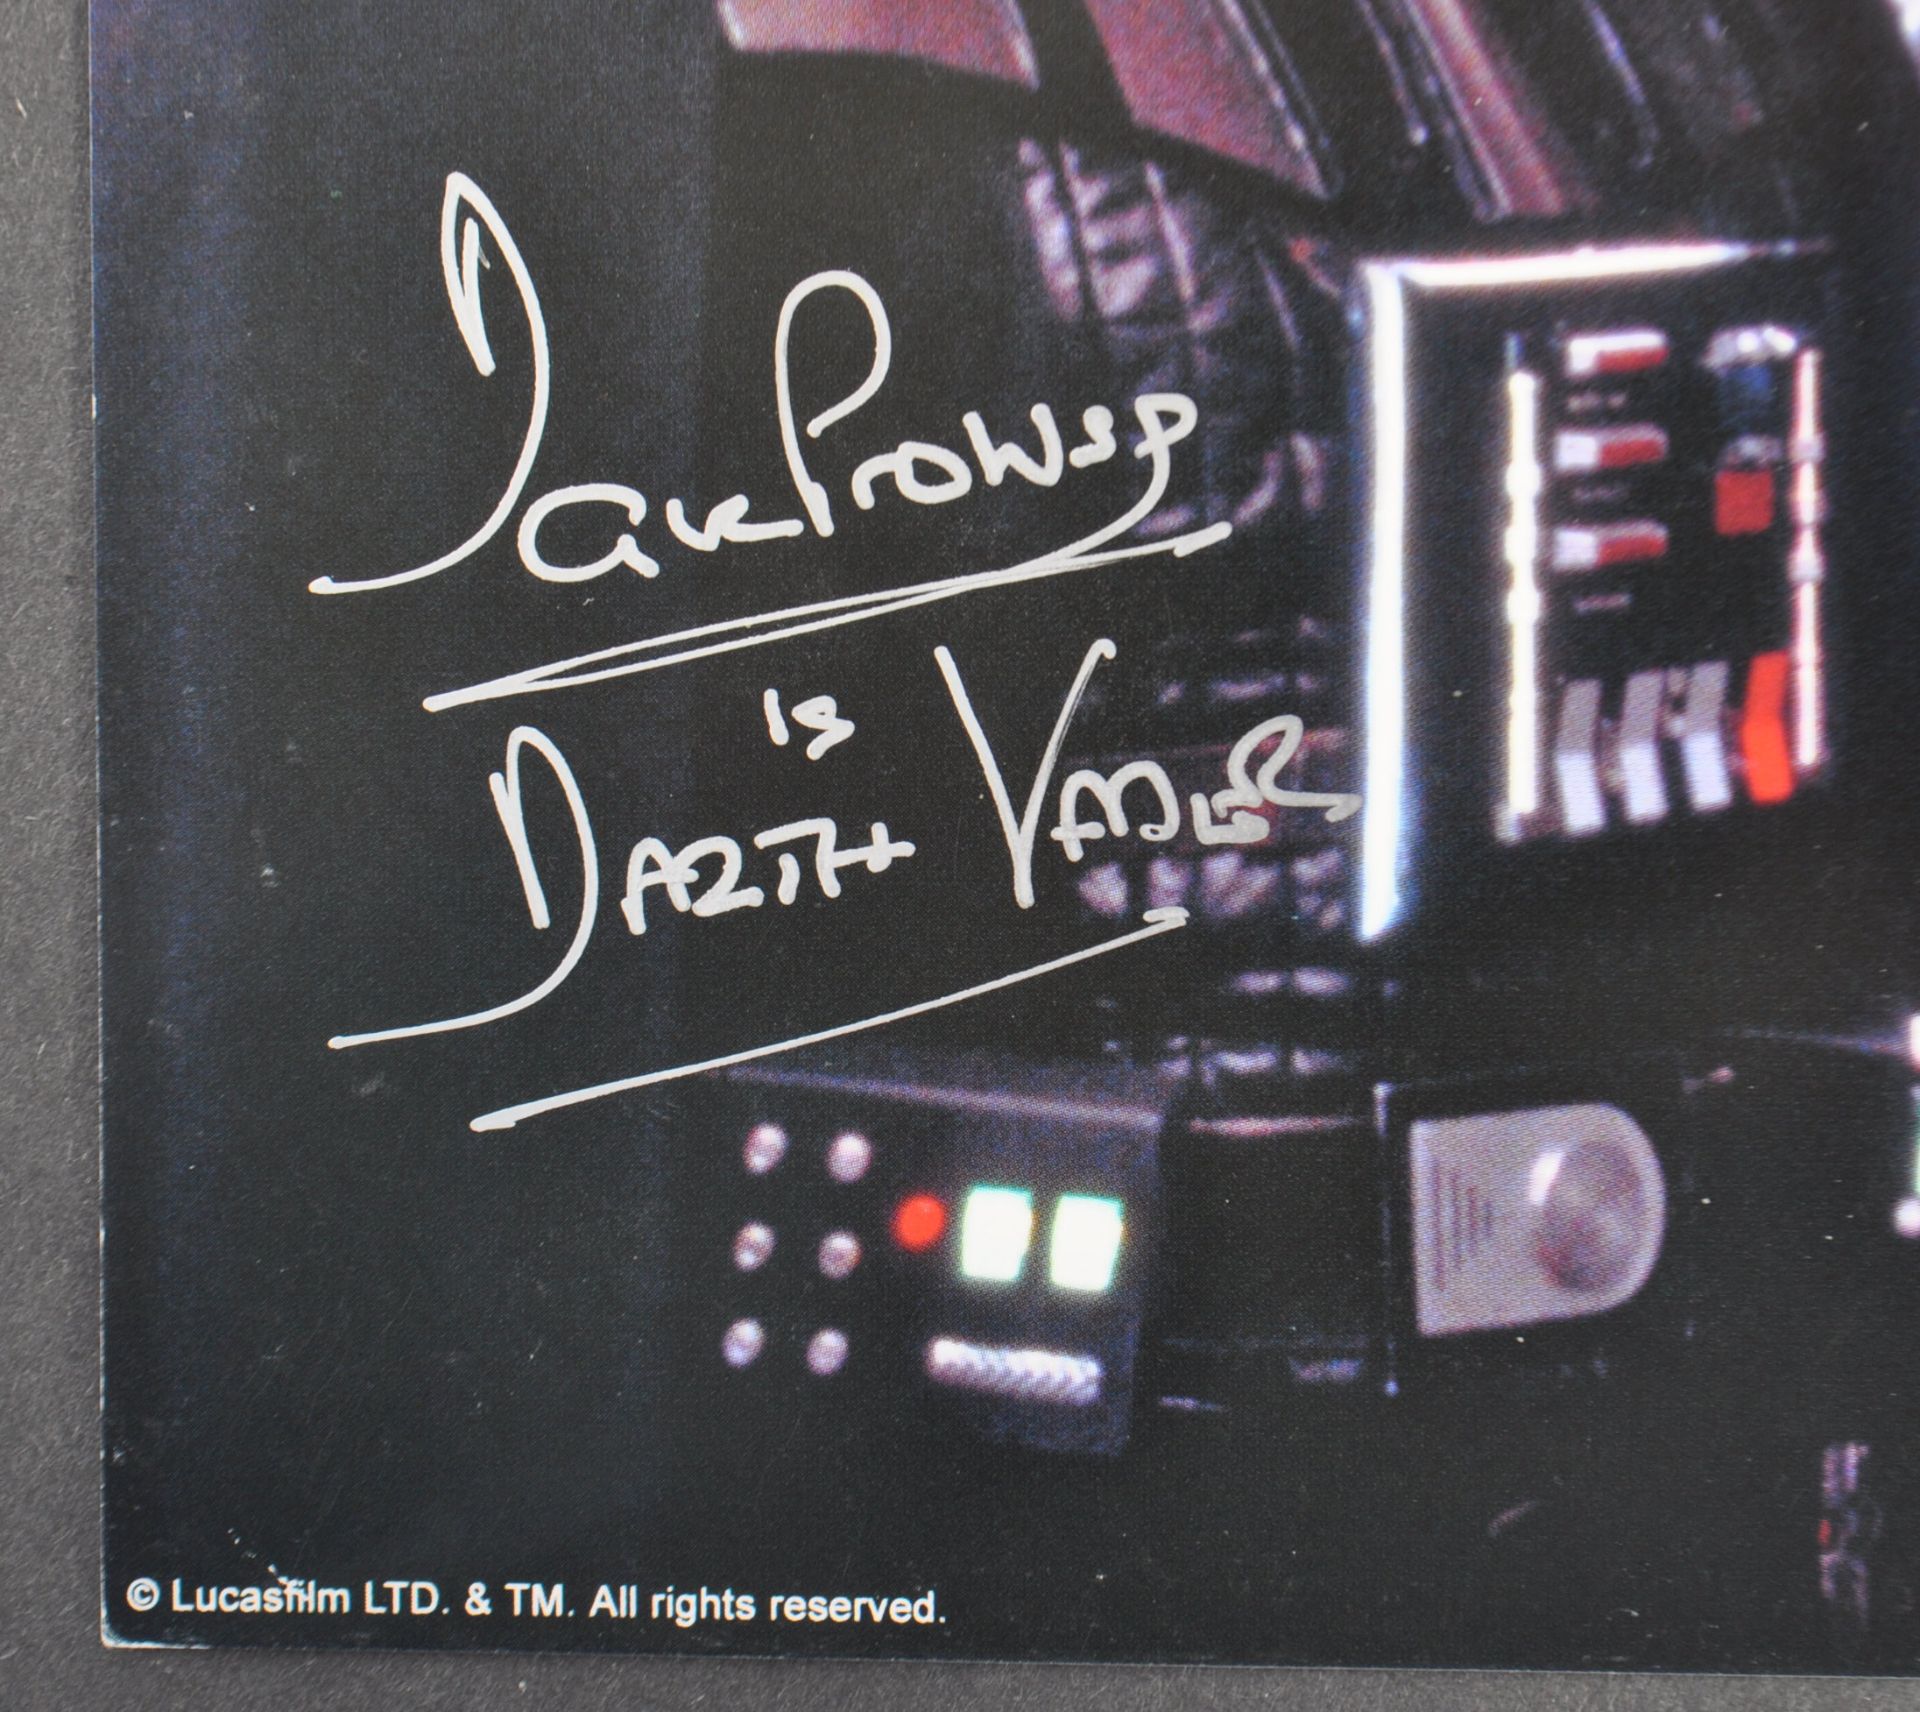 ESTATE OF DAVE PROWSE - VADER & FETT DUAL SIGNED PHOTOGRAPH - Image 2 of 3